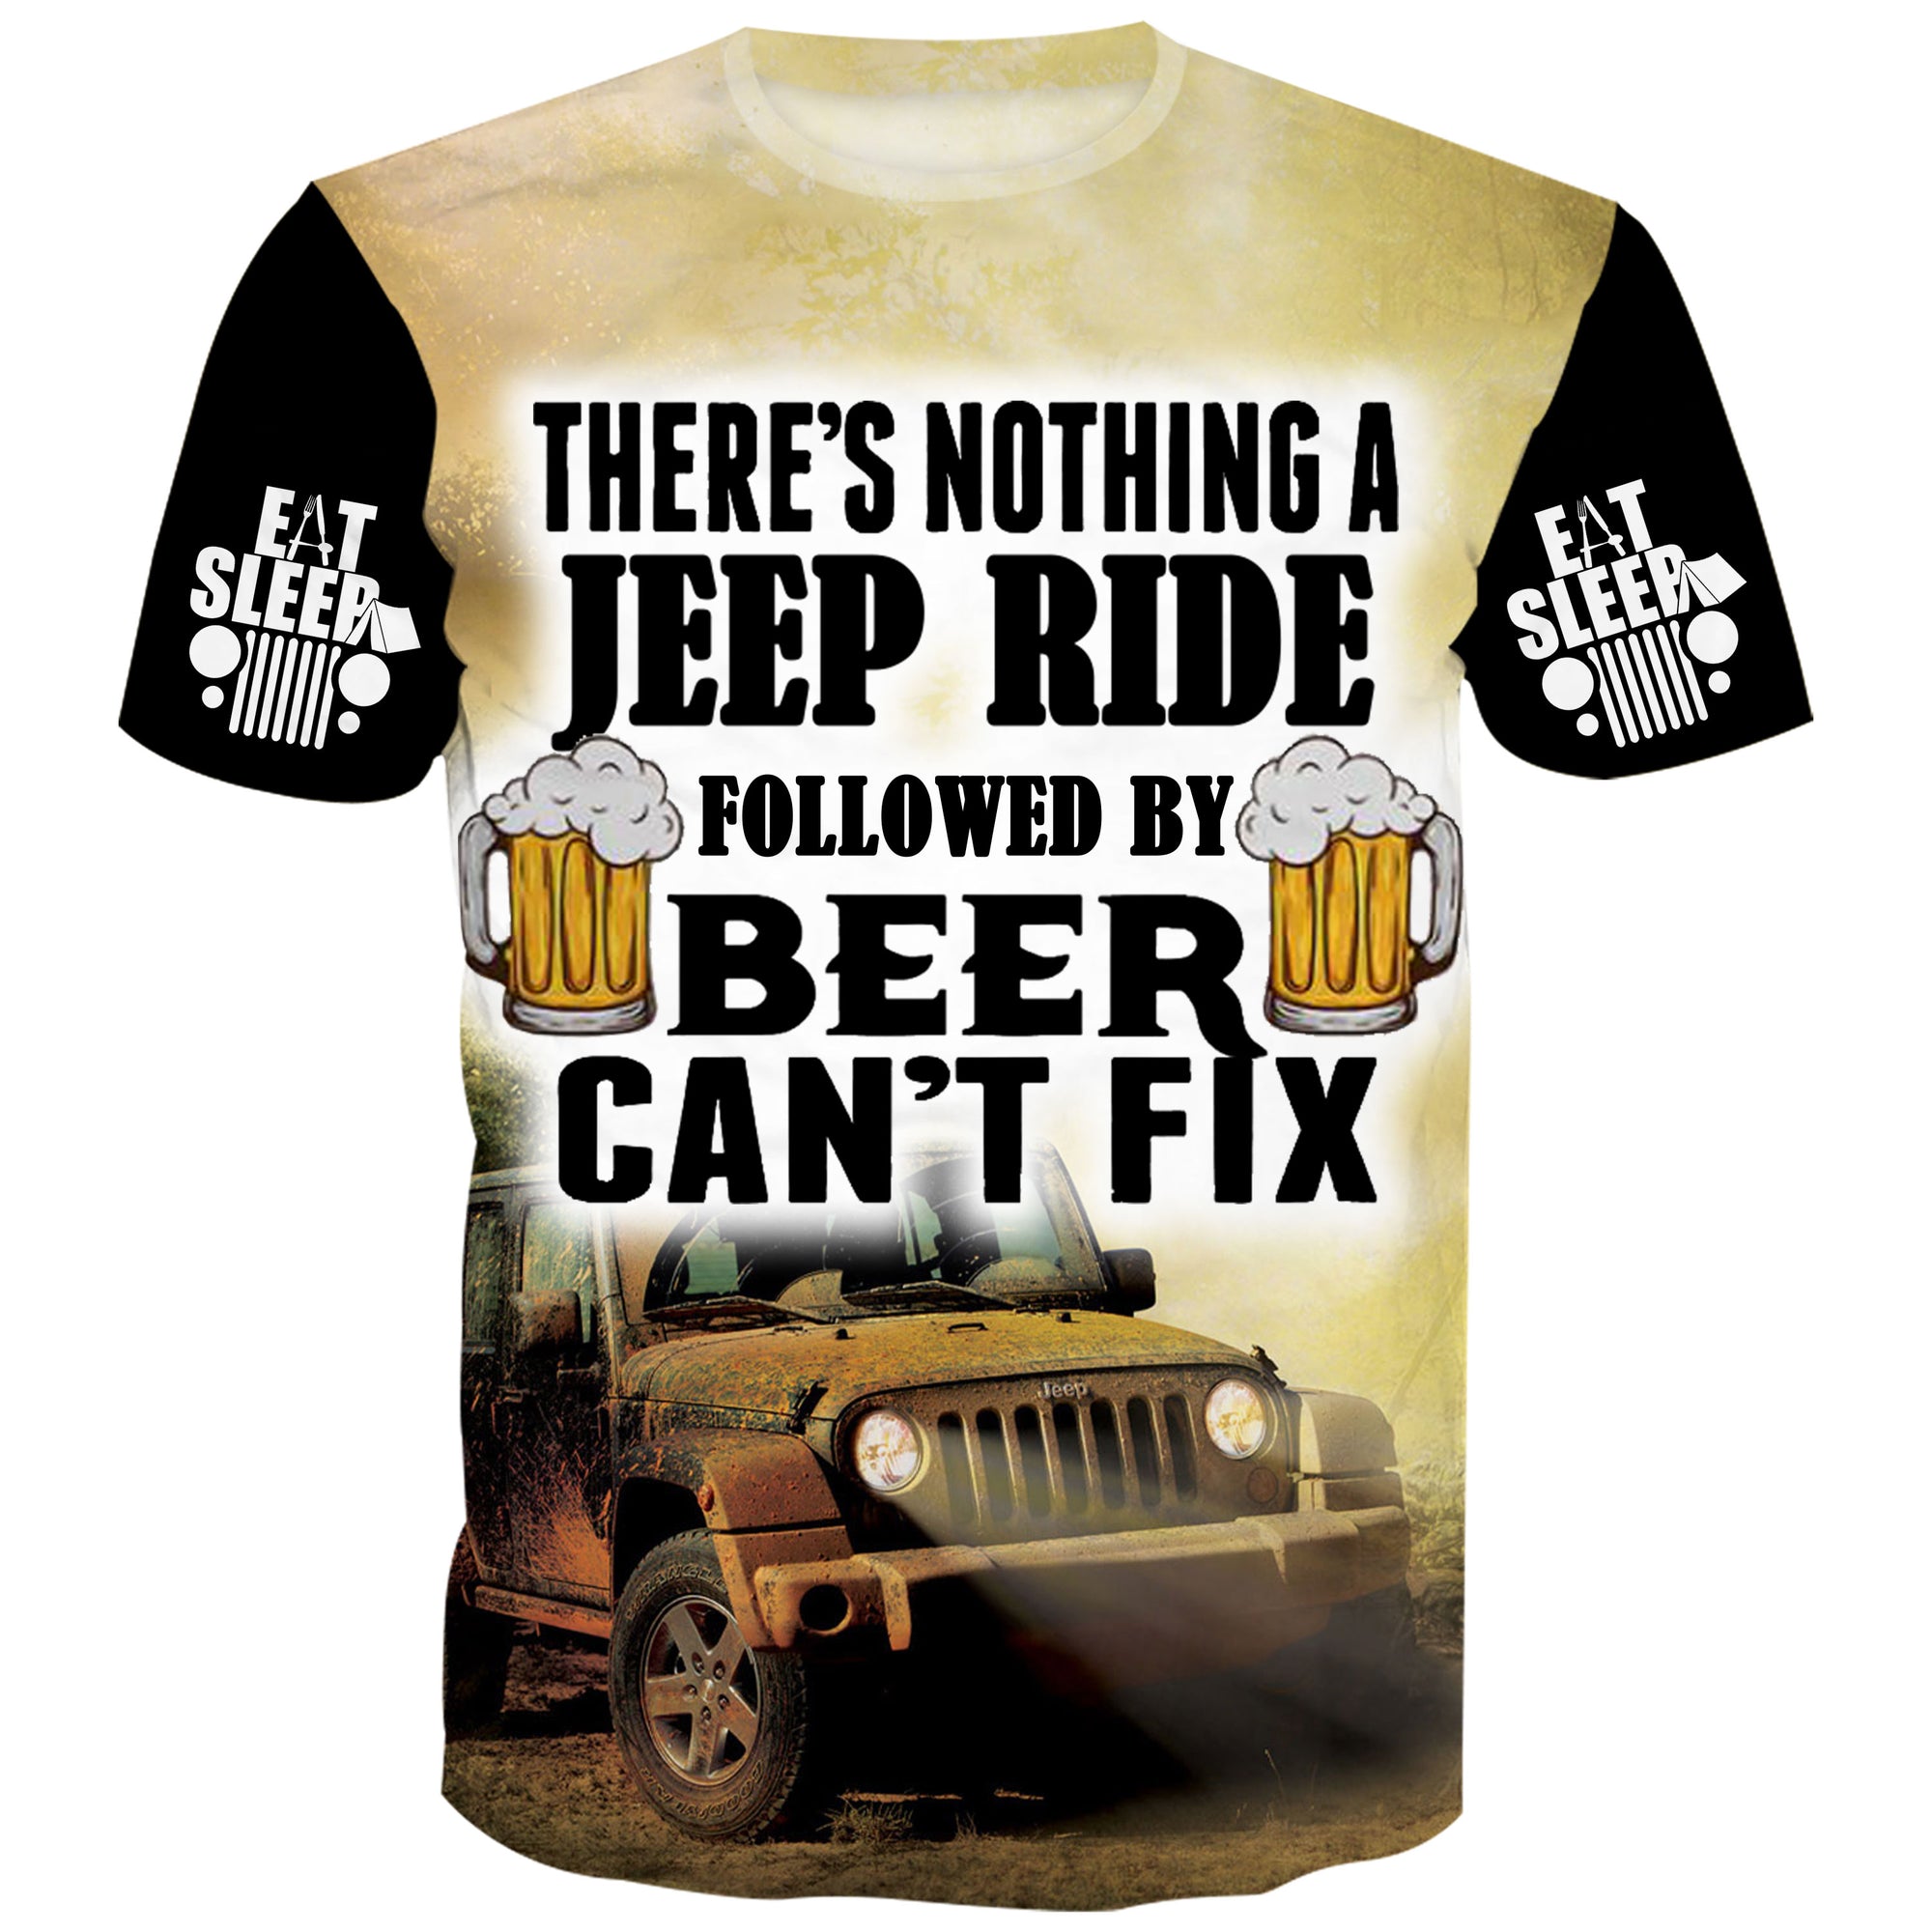 There's nothing Jeep ride followed by Beer can't Fix - T-Shirt